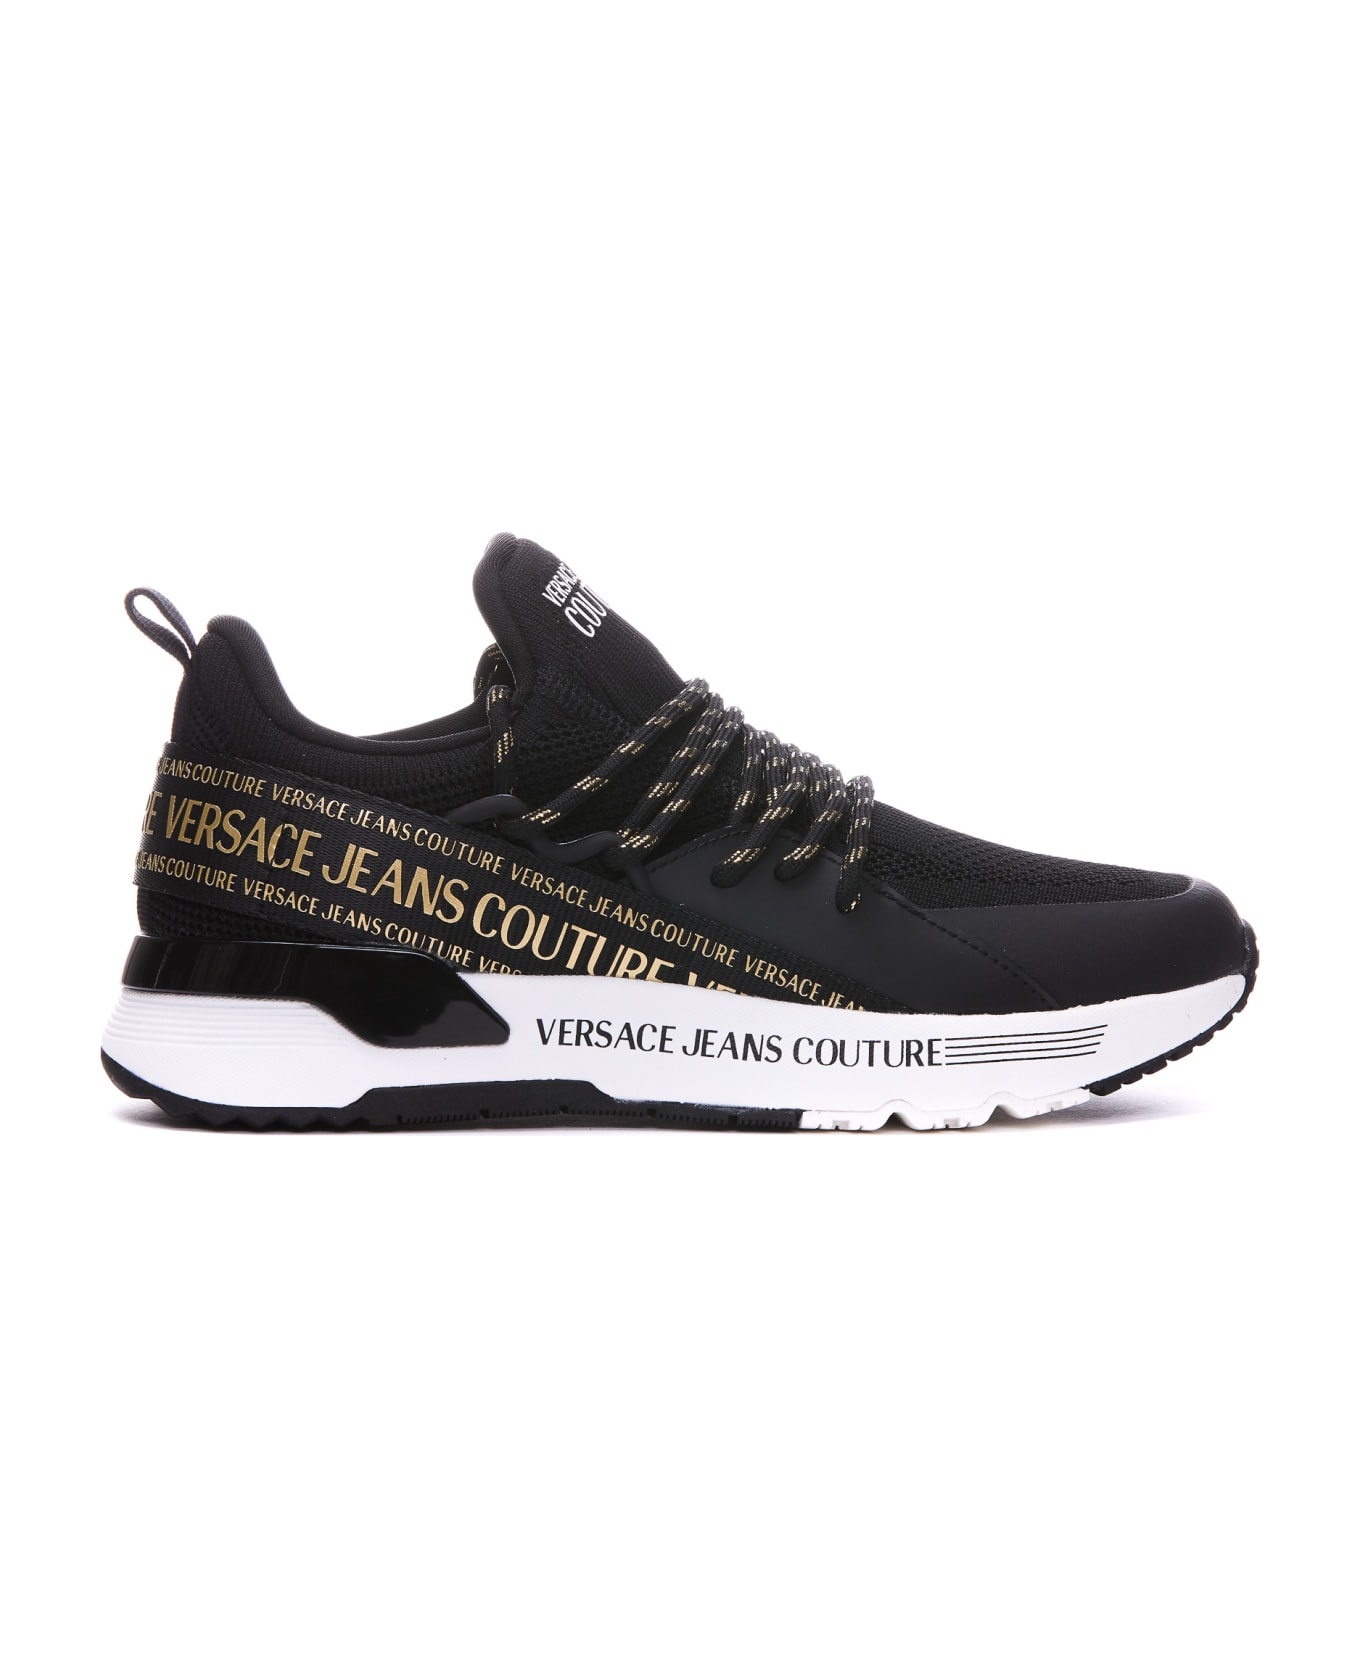 Versace Jeans Couture Dynamic Sneakers - BLACK/GOLD